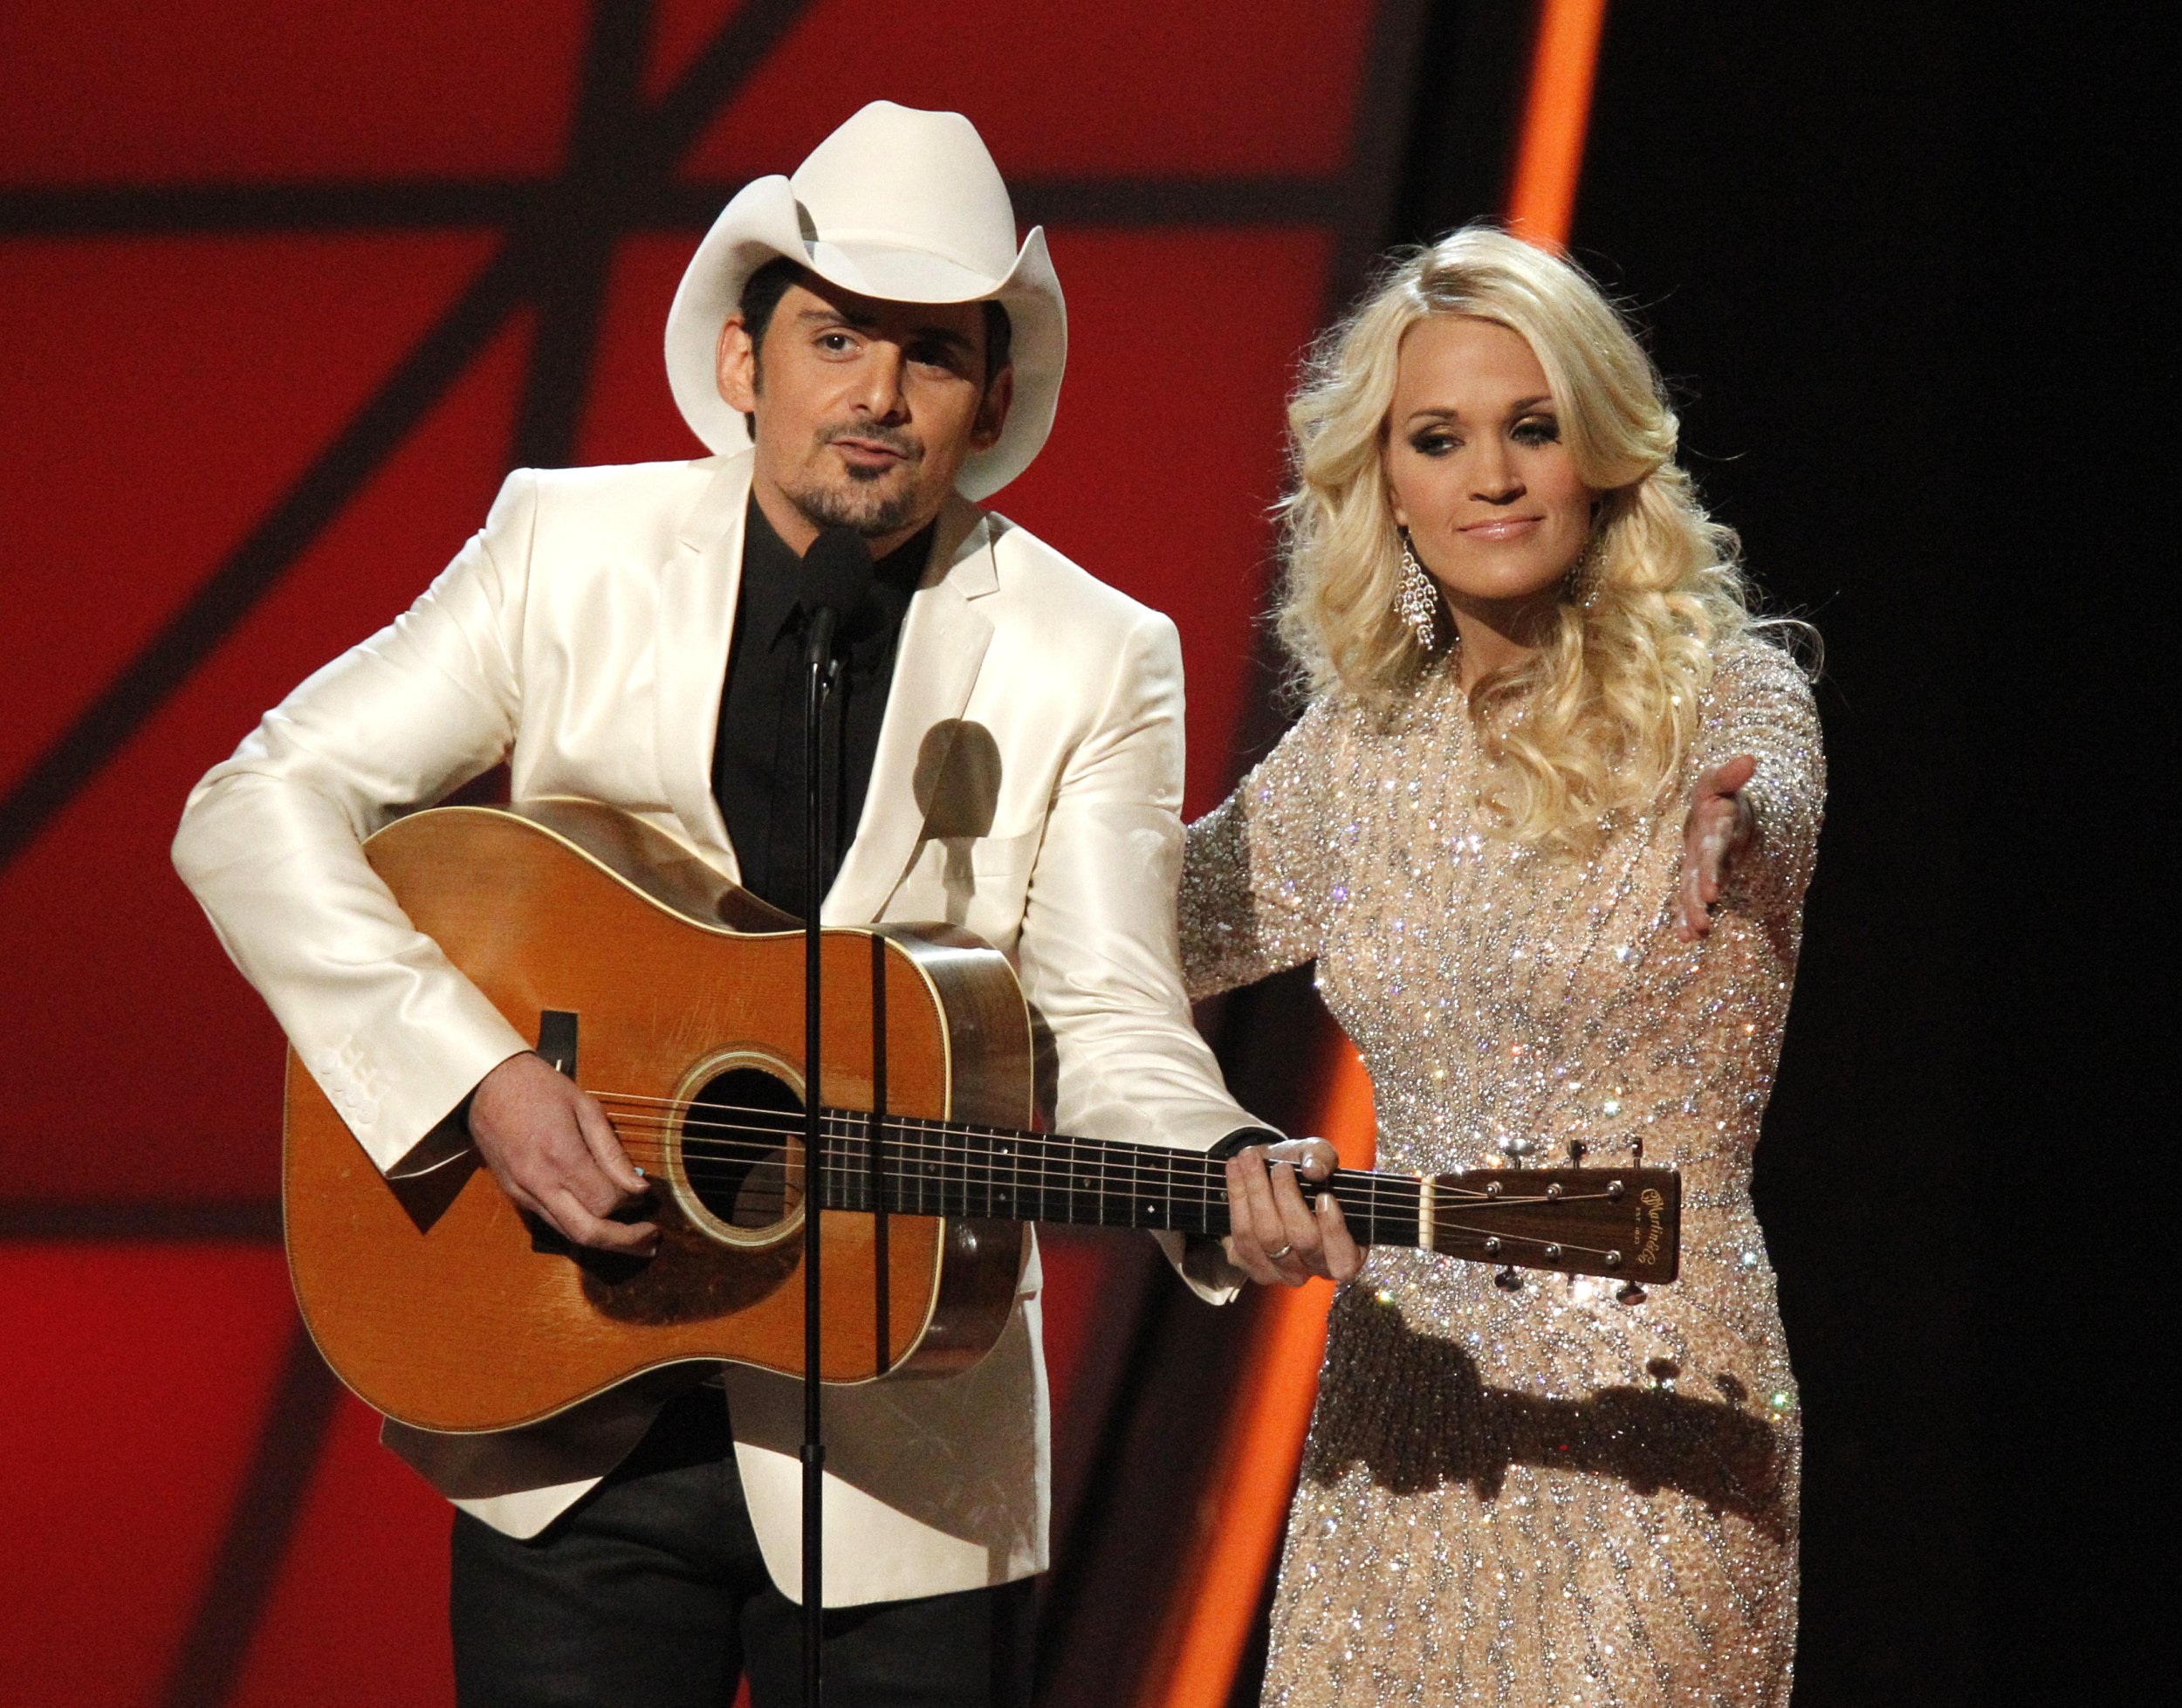 Hosts Brad Paisley and Carrie Underwood